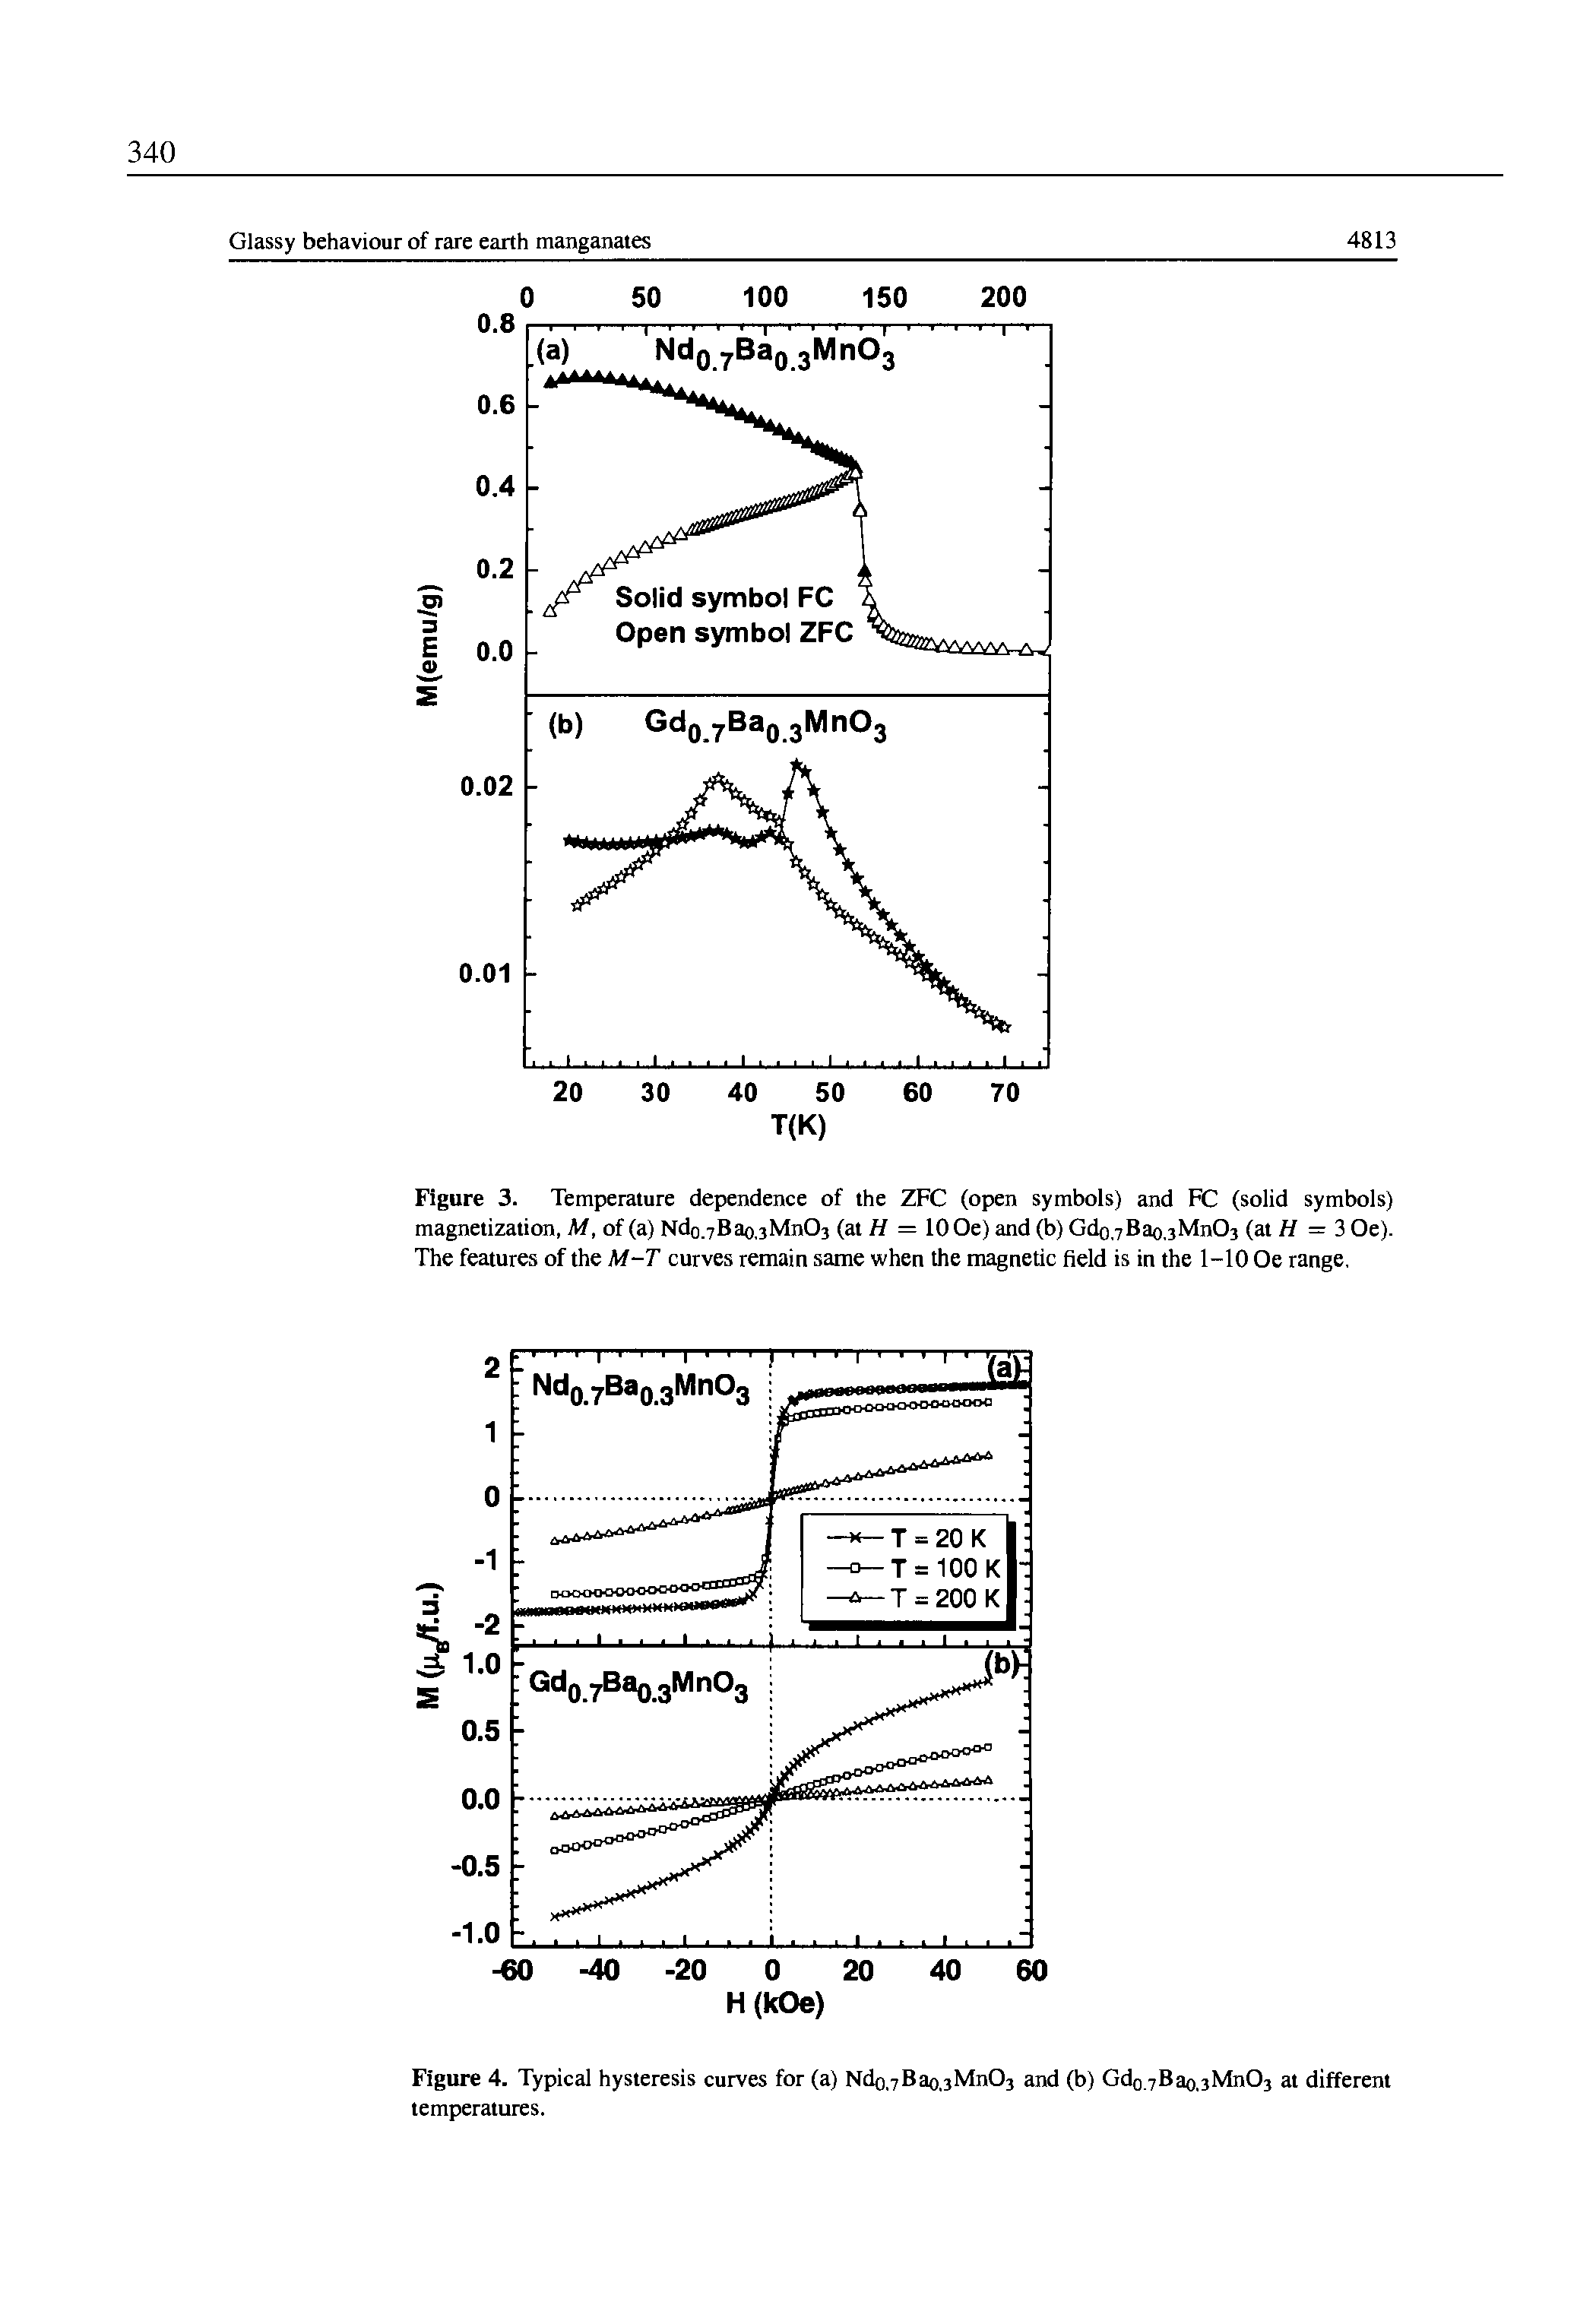 Figure 3. Temperature dependence of the ZFC (open symbols) and FC (solid symbols) magnetization, M, of (a) Ndo.7Bao,3Mn03 (at H = 10 Oe) and (b) Gdo,7Bao,3Mn03 (at H = 3 Oe). The features of the M-T curves remain same when the magnetic field is in the 1-10 Oe range.